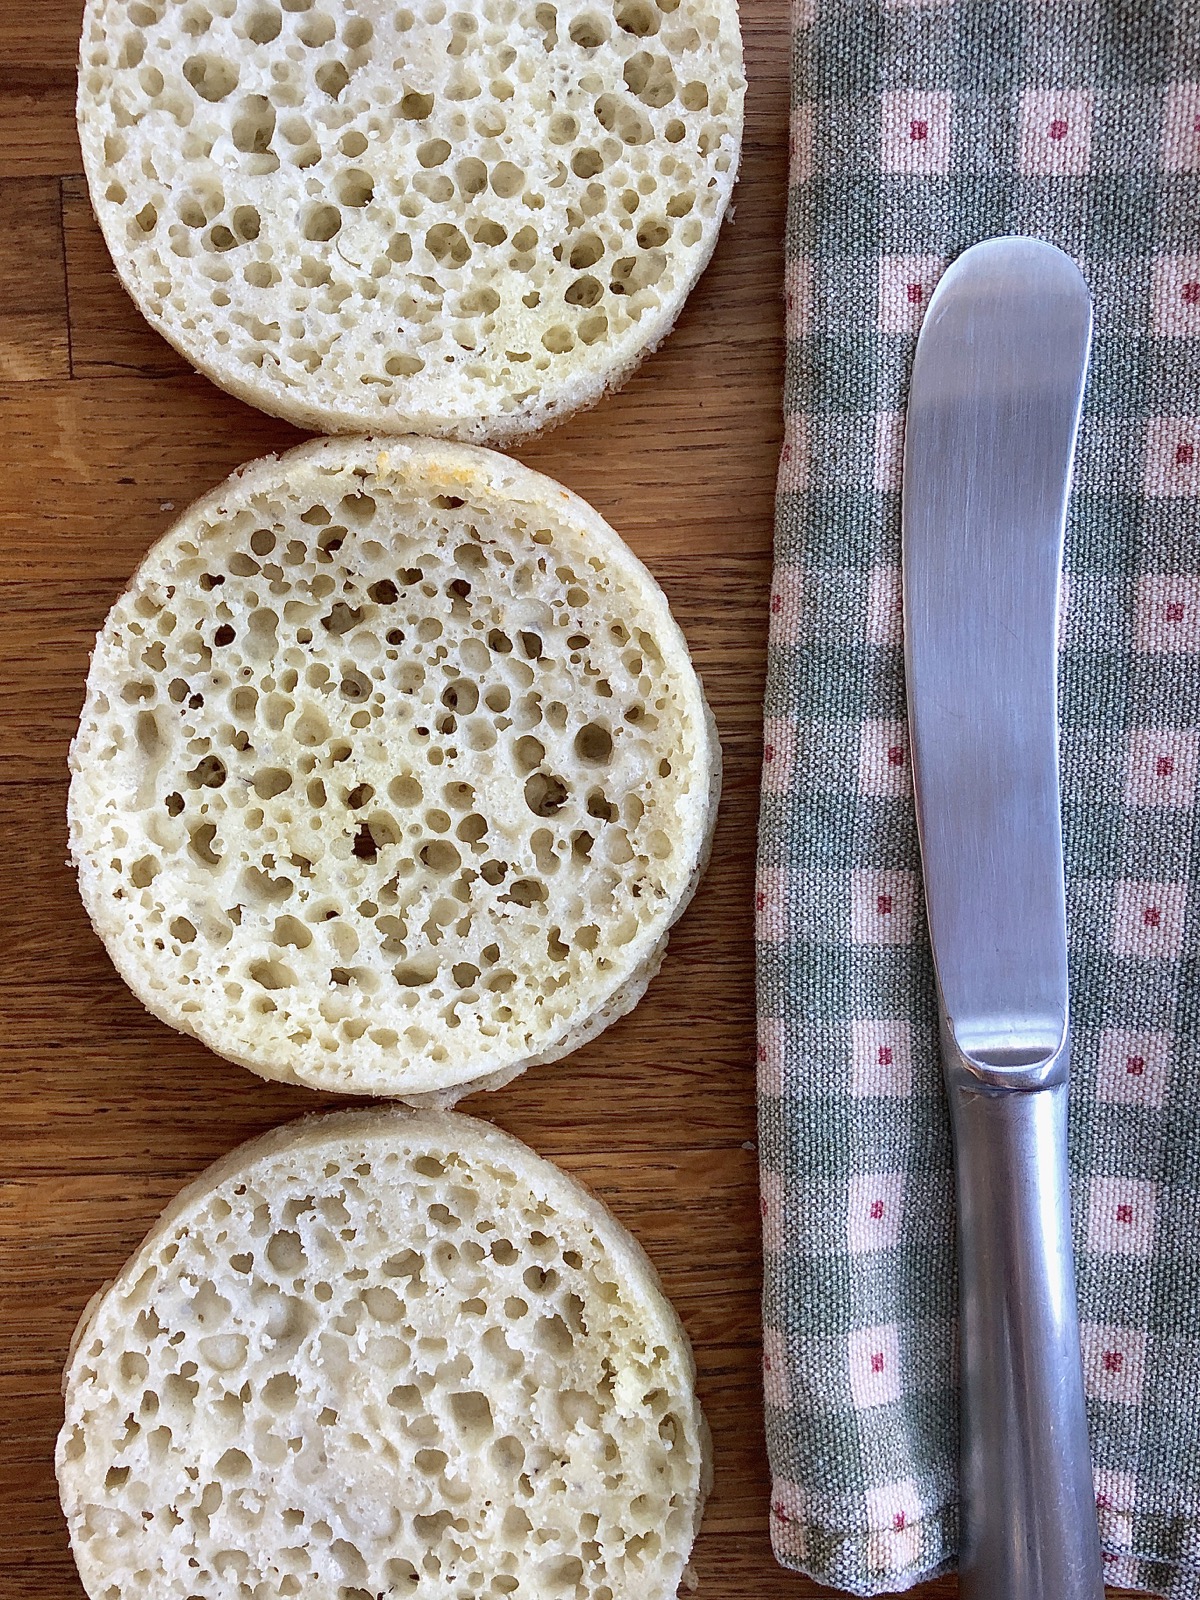 Three sourdough crumpets, split to show their hole-riddled interior.